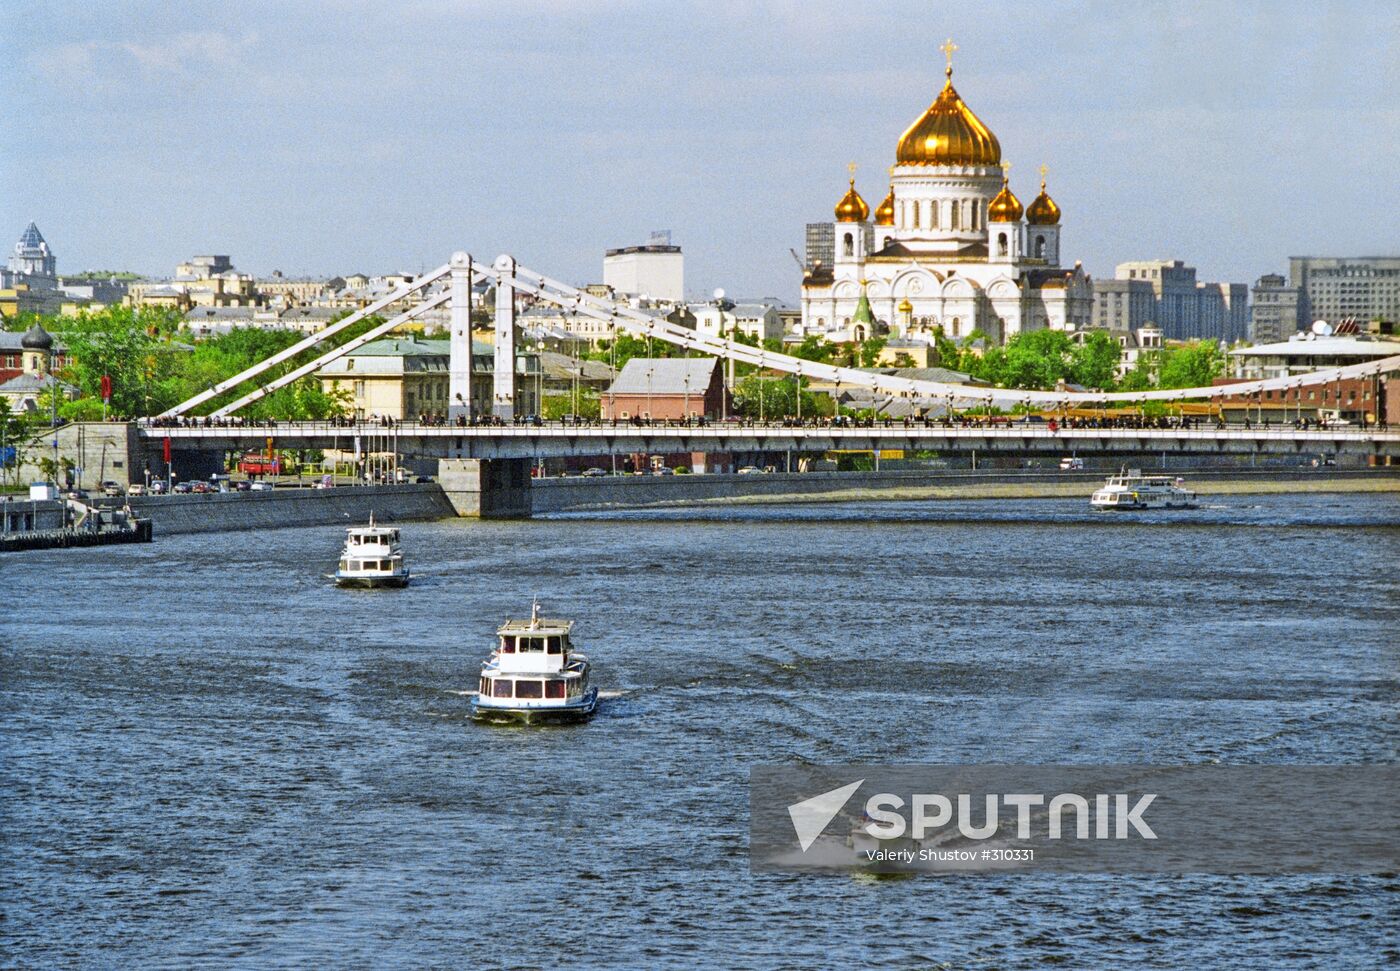 The Crimean Bridge and Cathedral of Christ the Savior